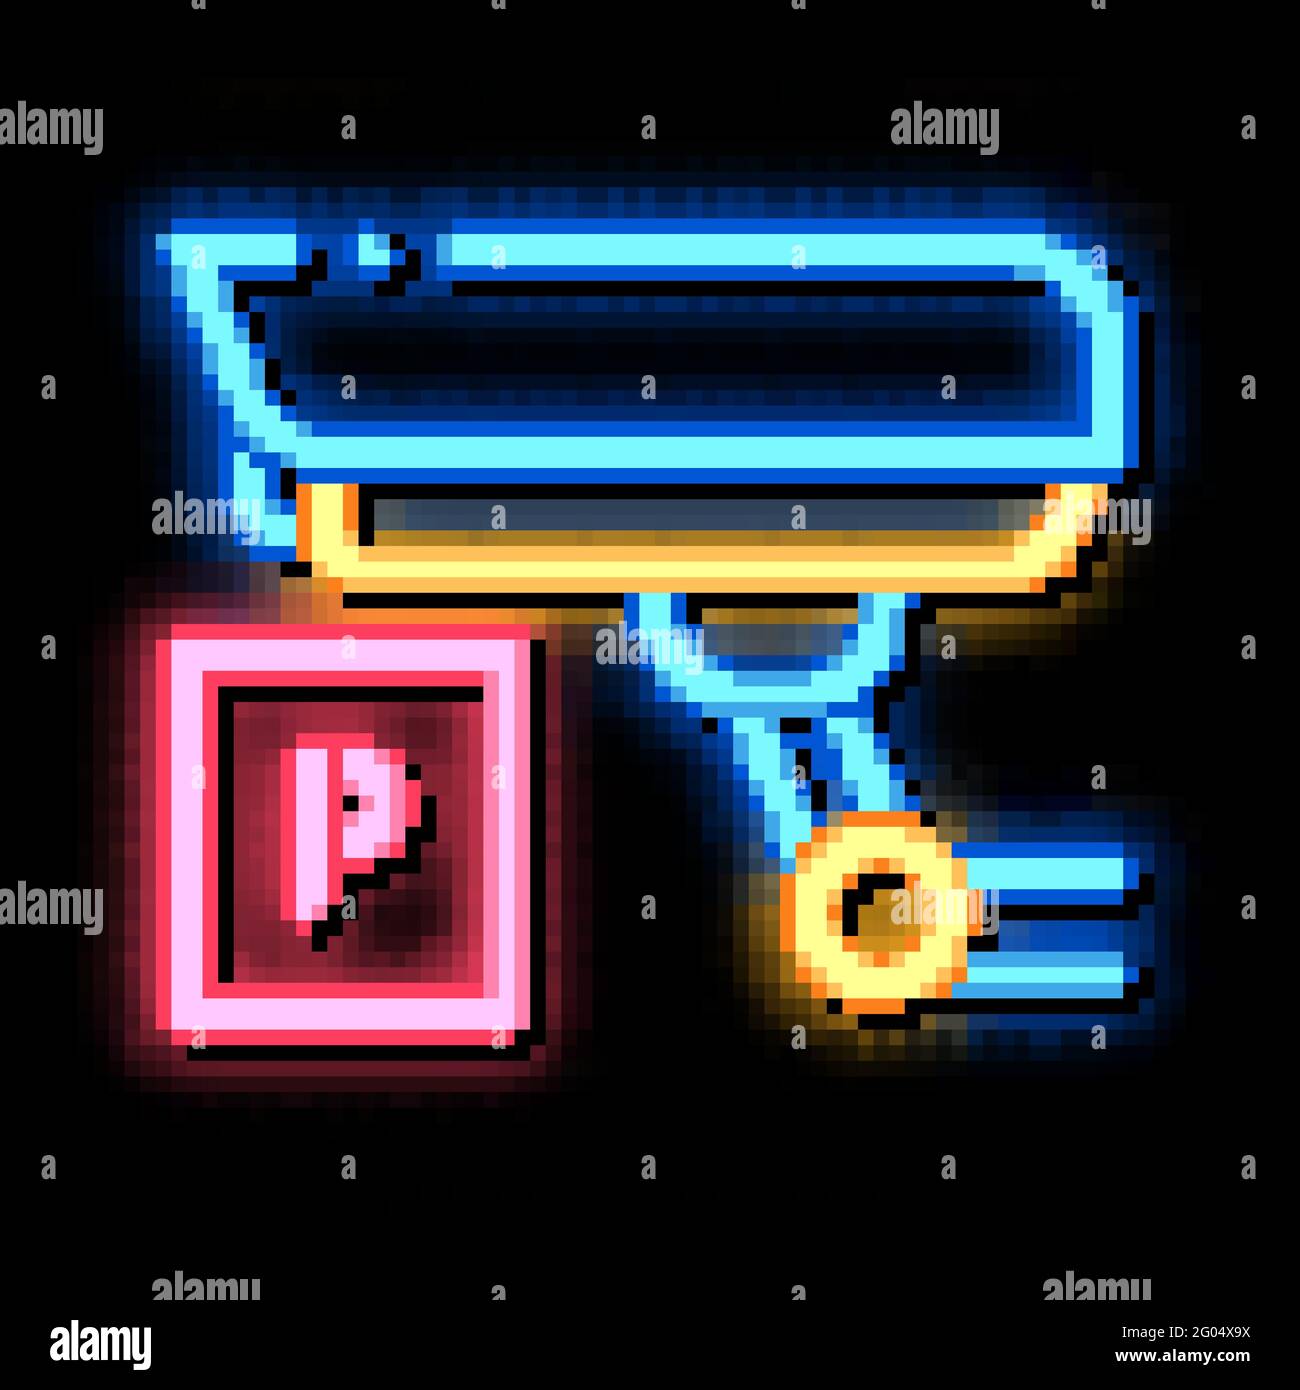 Parking Camcorder neon glow icon illustration Stock Vector